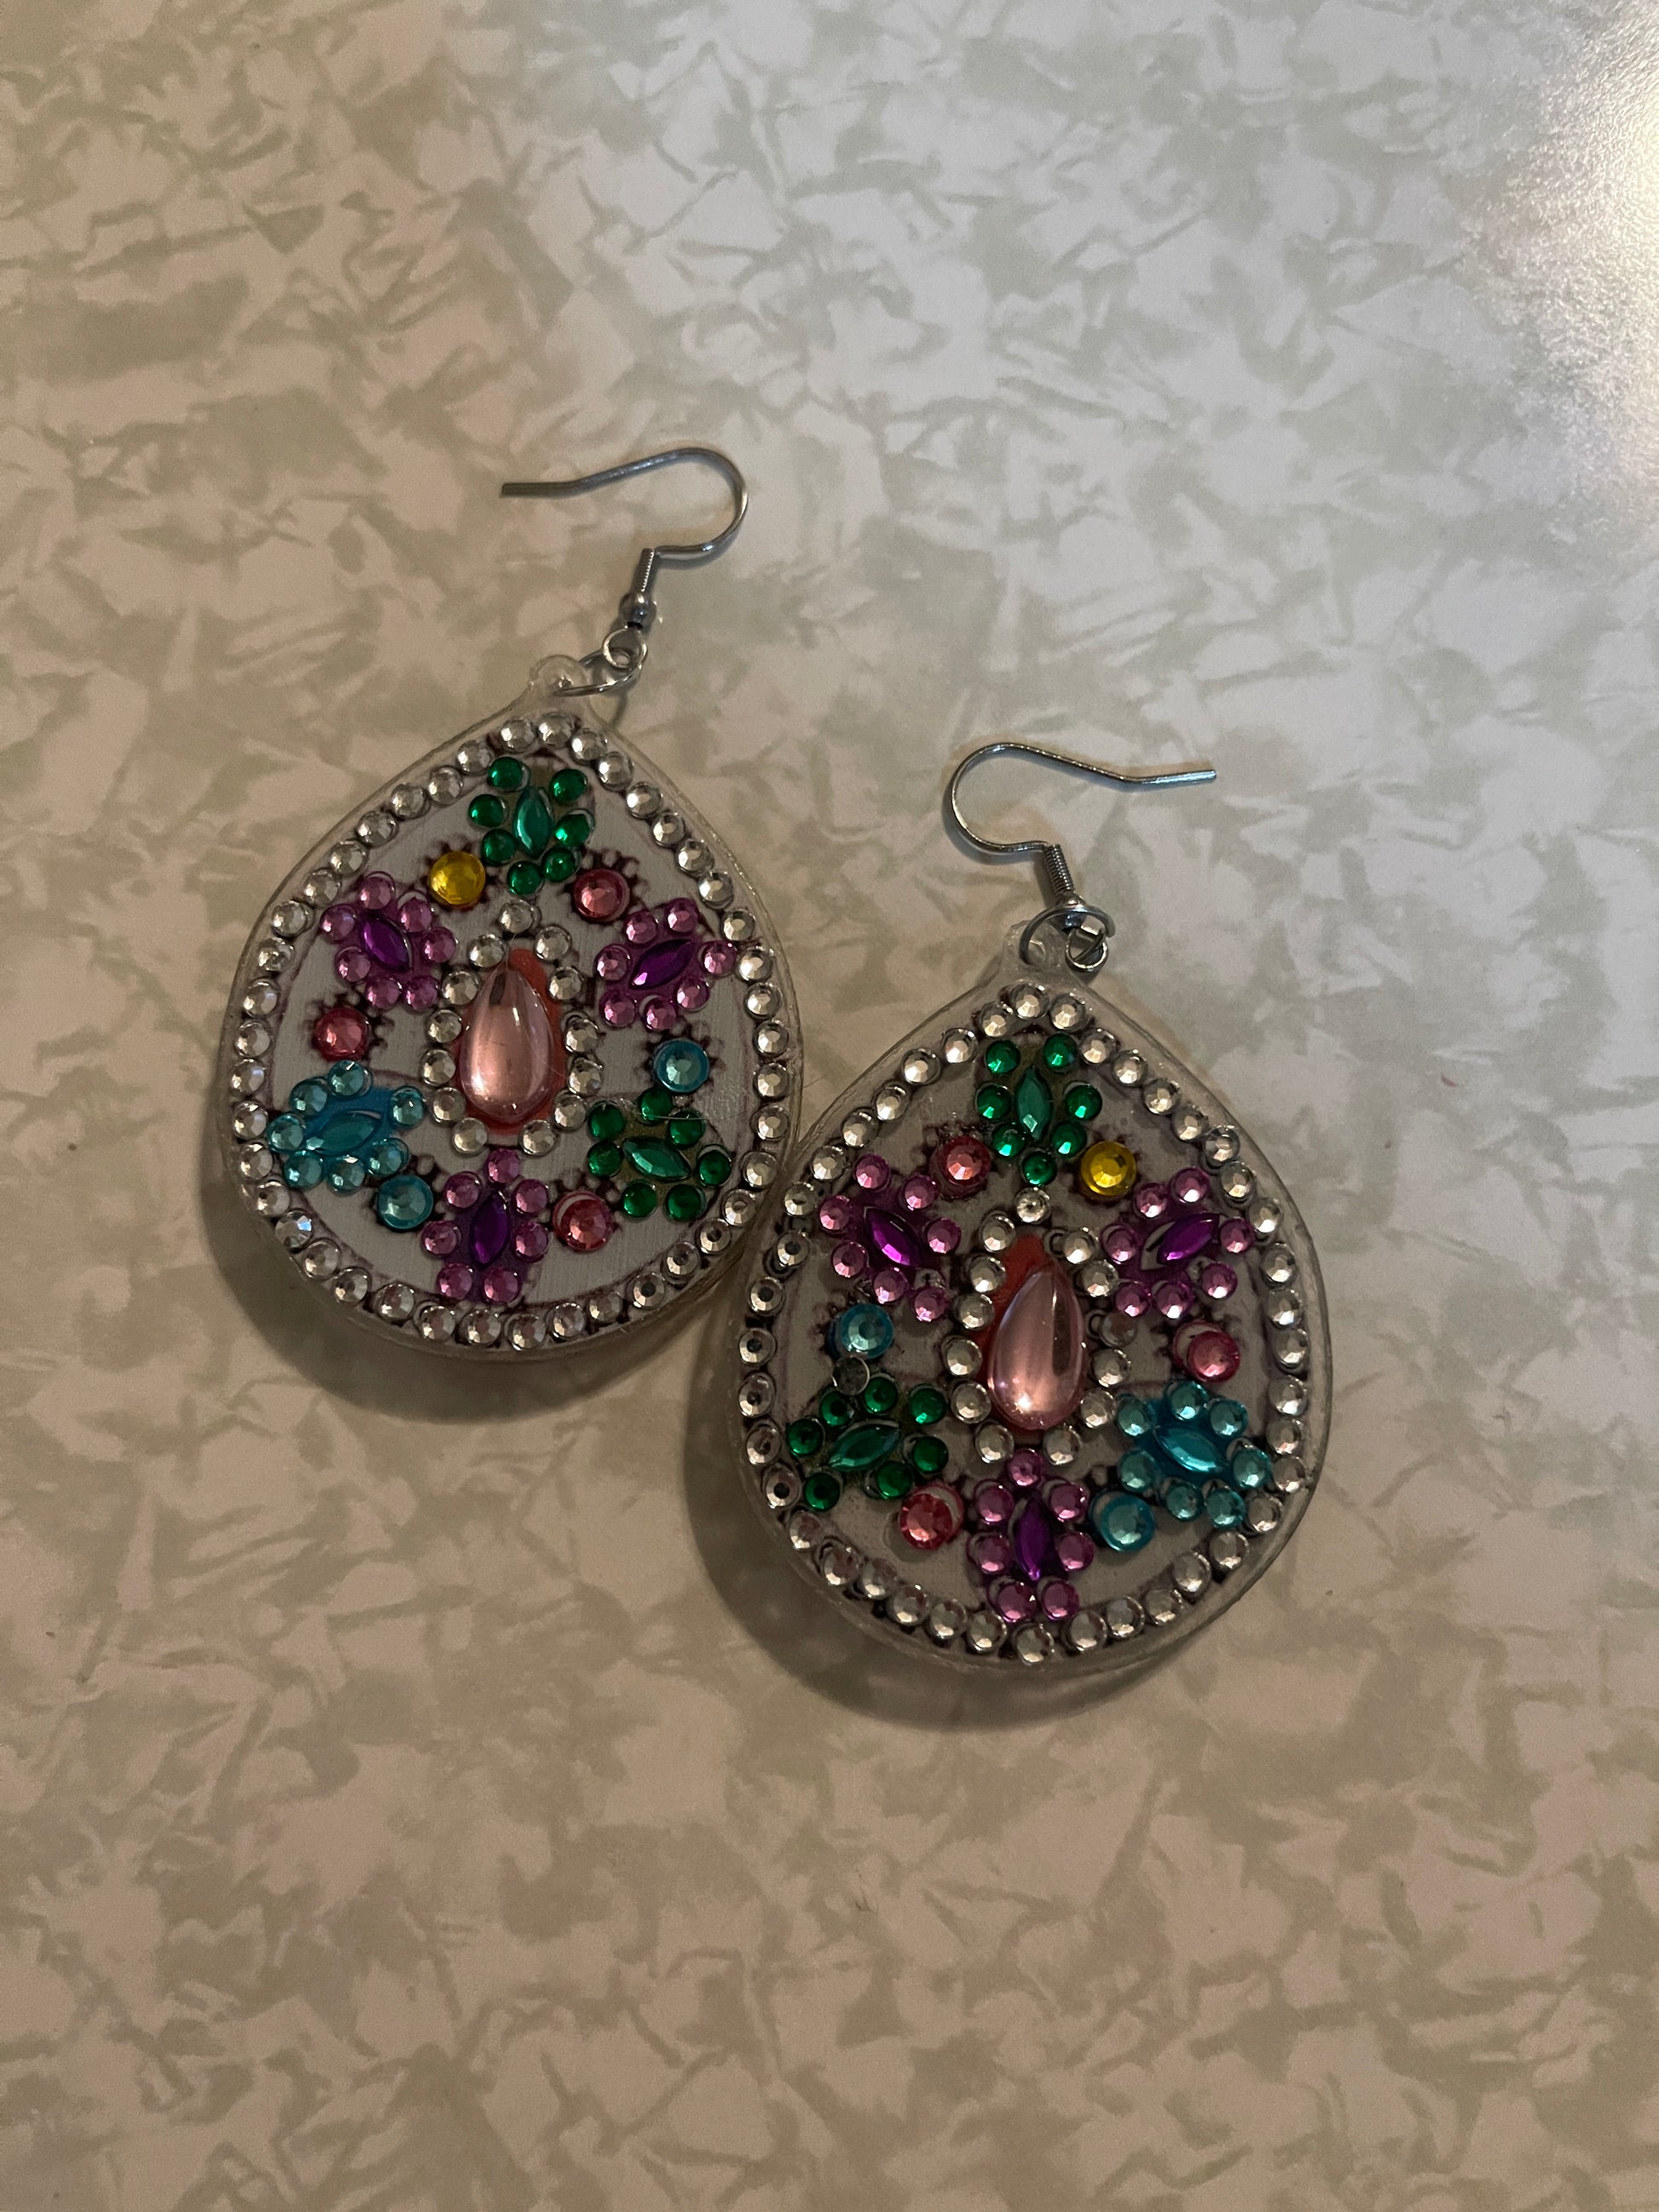 Diamond Painting Wire Earrings; assorted designs, shapes and colorsPink tiful of LOVE